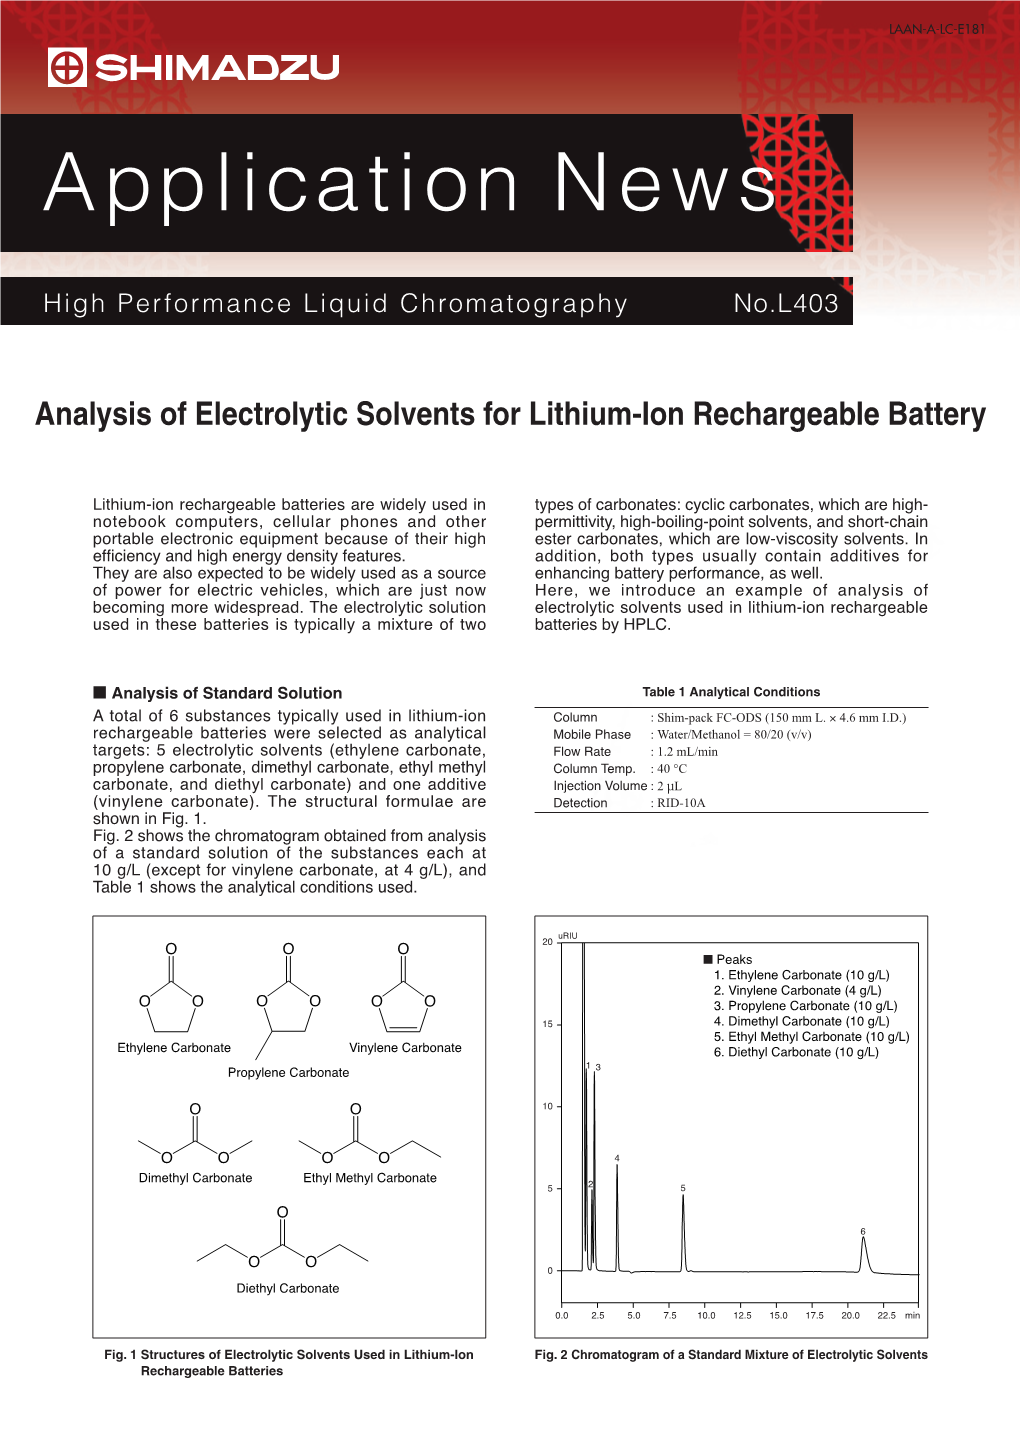 Analysis of Electrolytic Solvents for Lithium-Ion Rechargeable Battery